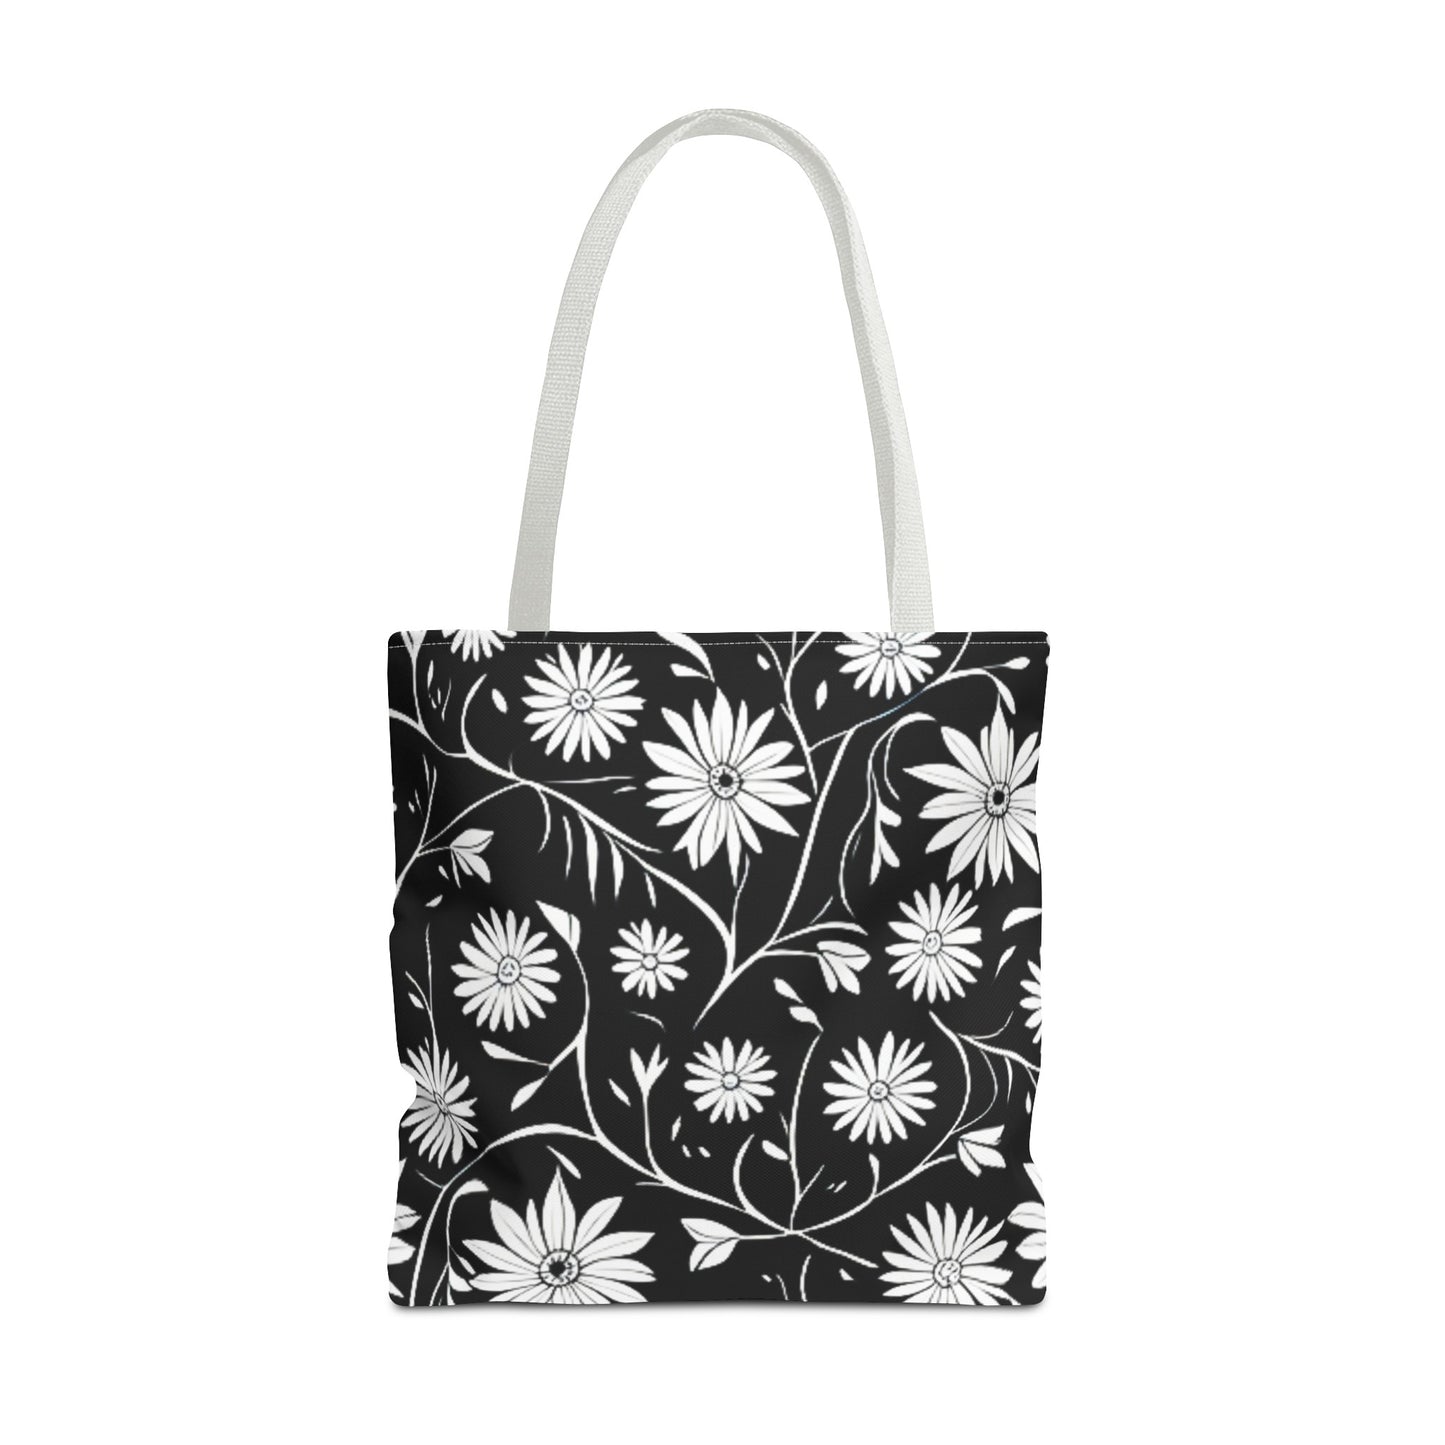 Field of Scandinavian Black and White Daisies 1970s Floral Pattern Book Tote Bag